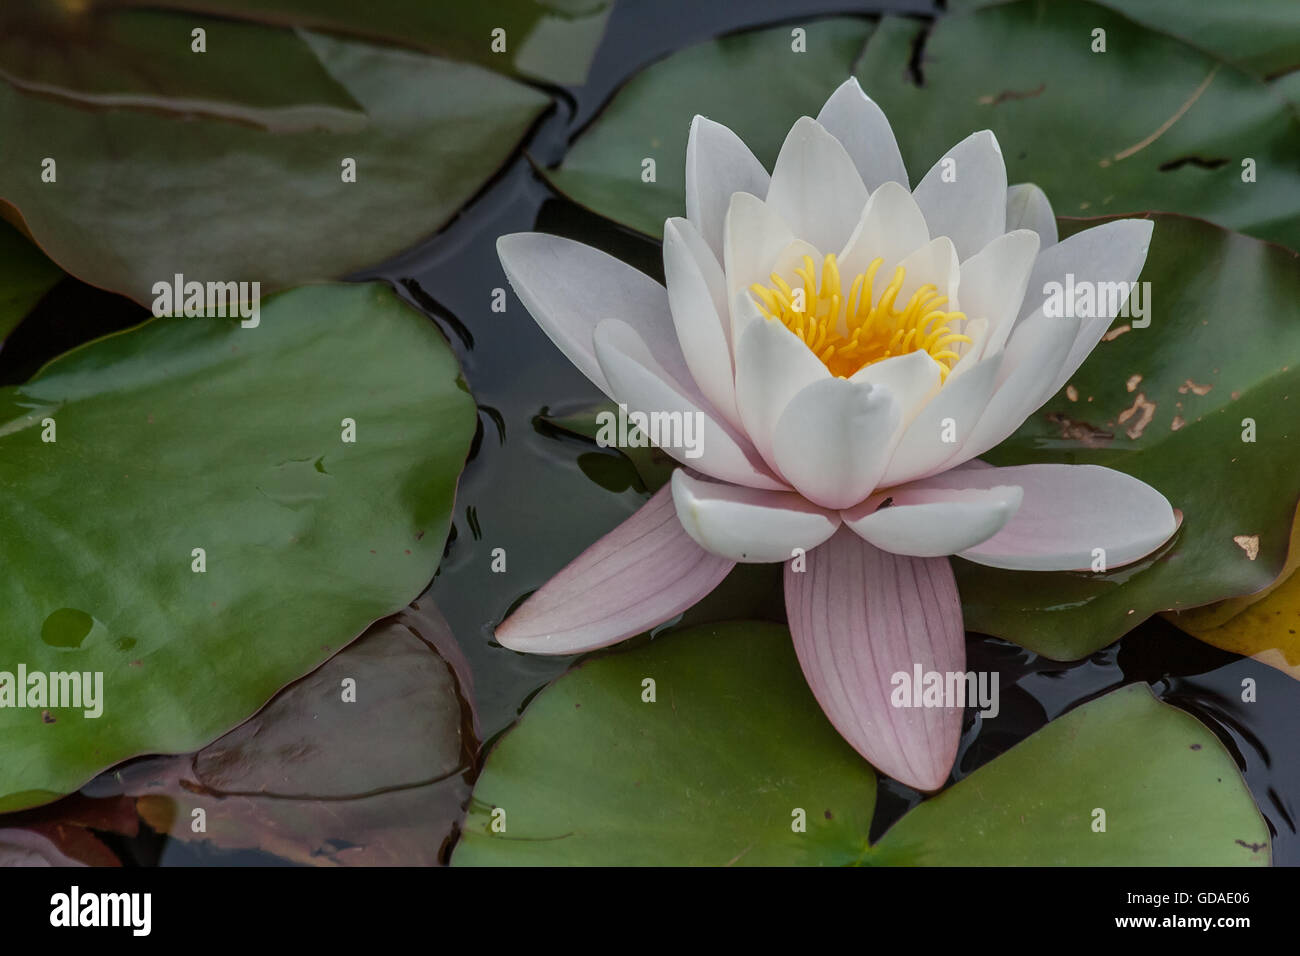 white lotus flower and green leaves in a pond Stock Photo